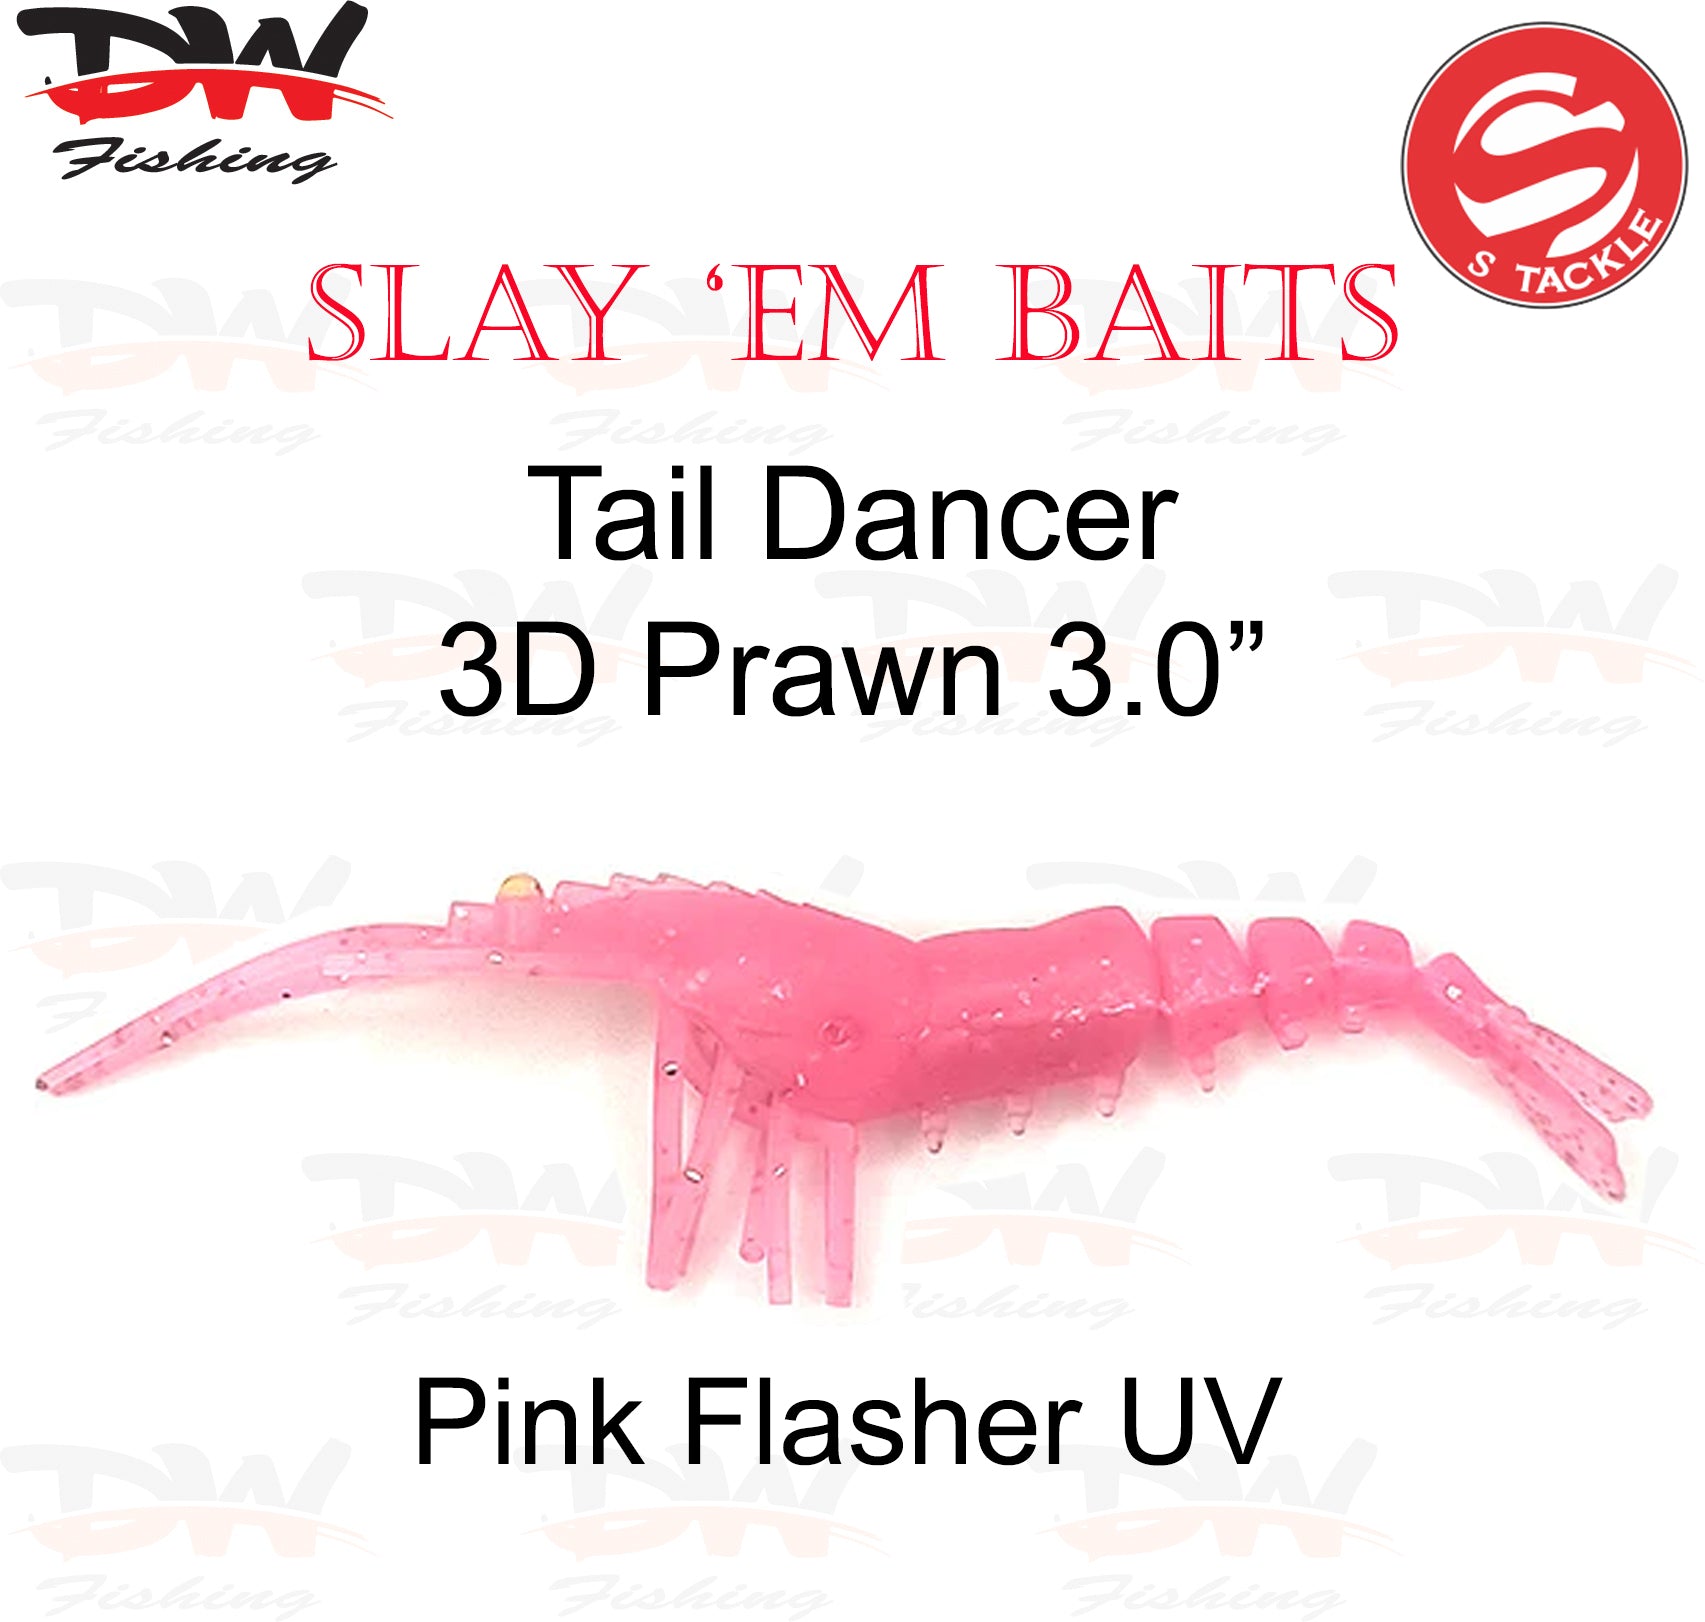 S Tackle 3D tail Dancer prawn lure 3.0 inch Imitation soft plastic lure Colour Pink Flasher UV